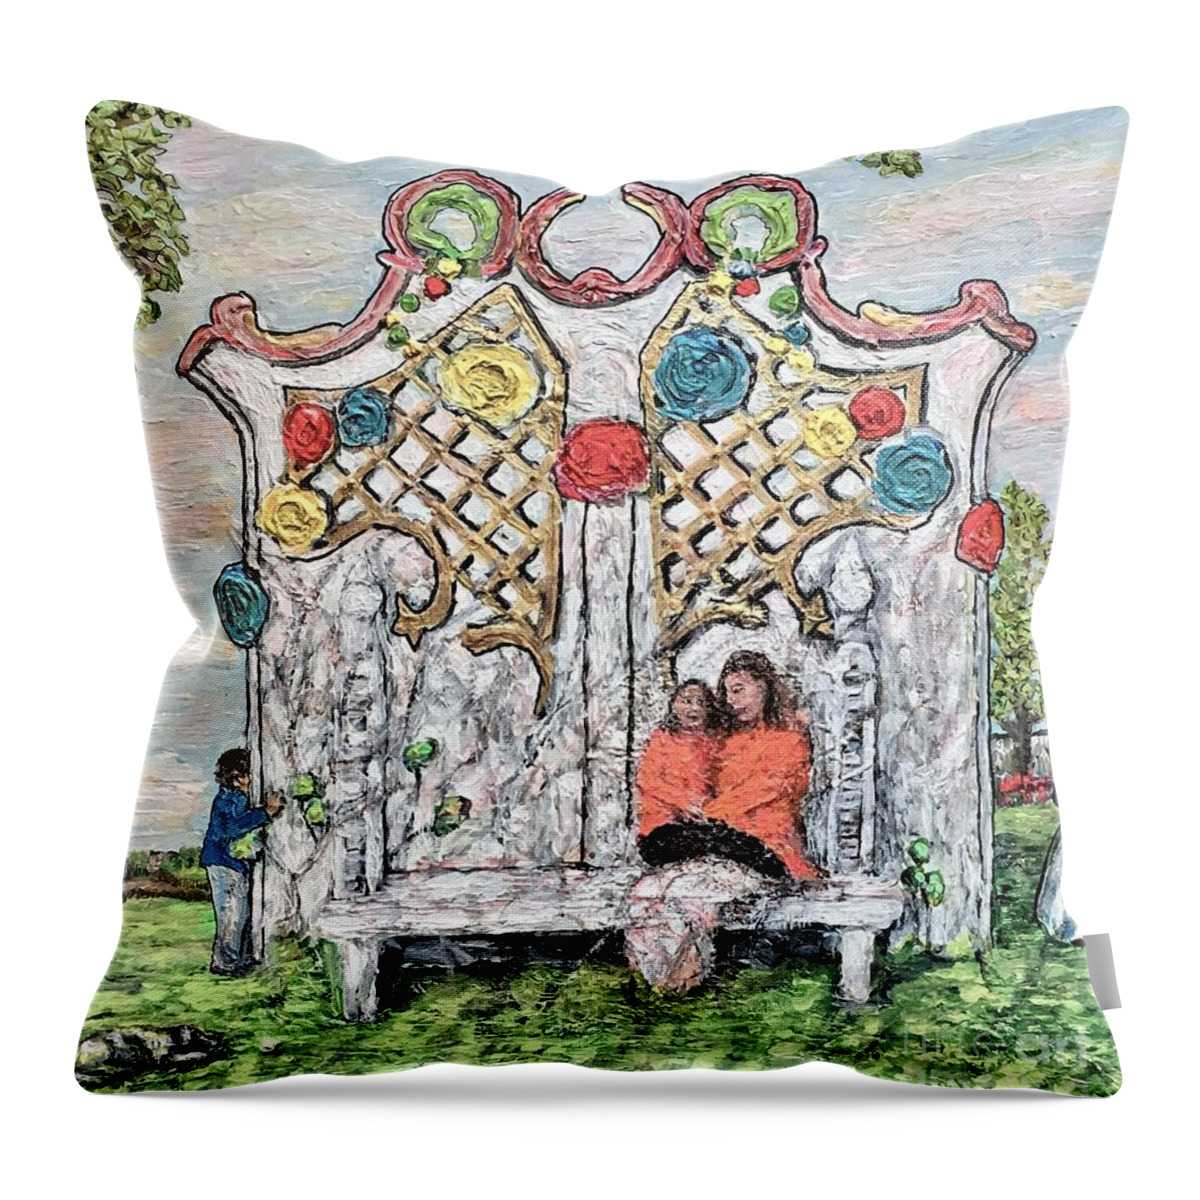 Garden Party Throw Pillow featuring the painting Garden Party by Richard Wandell